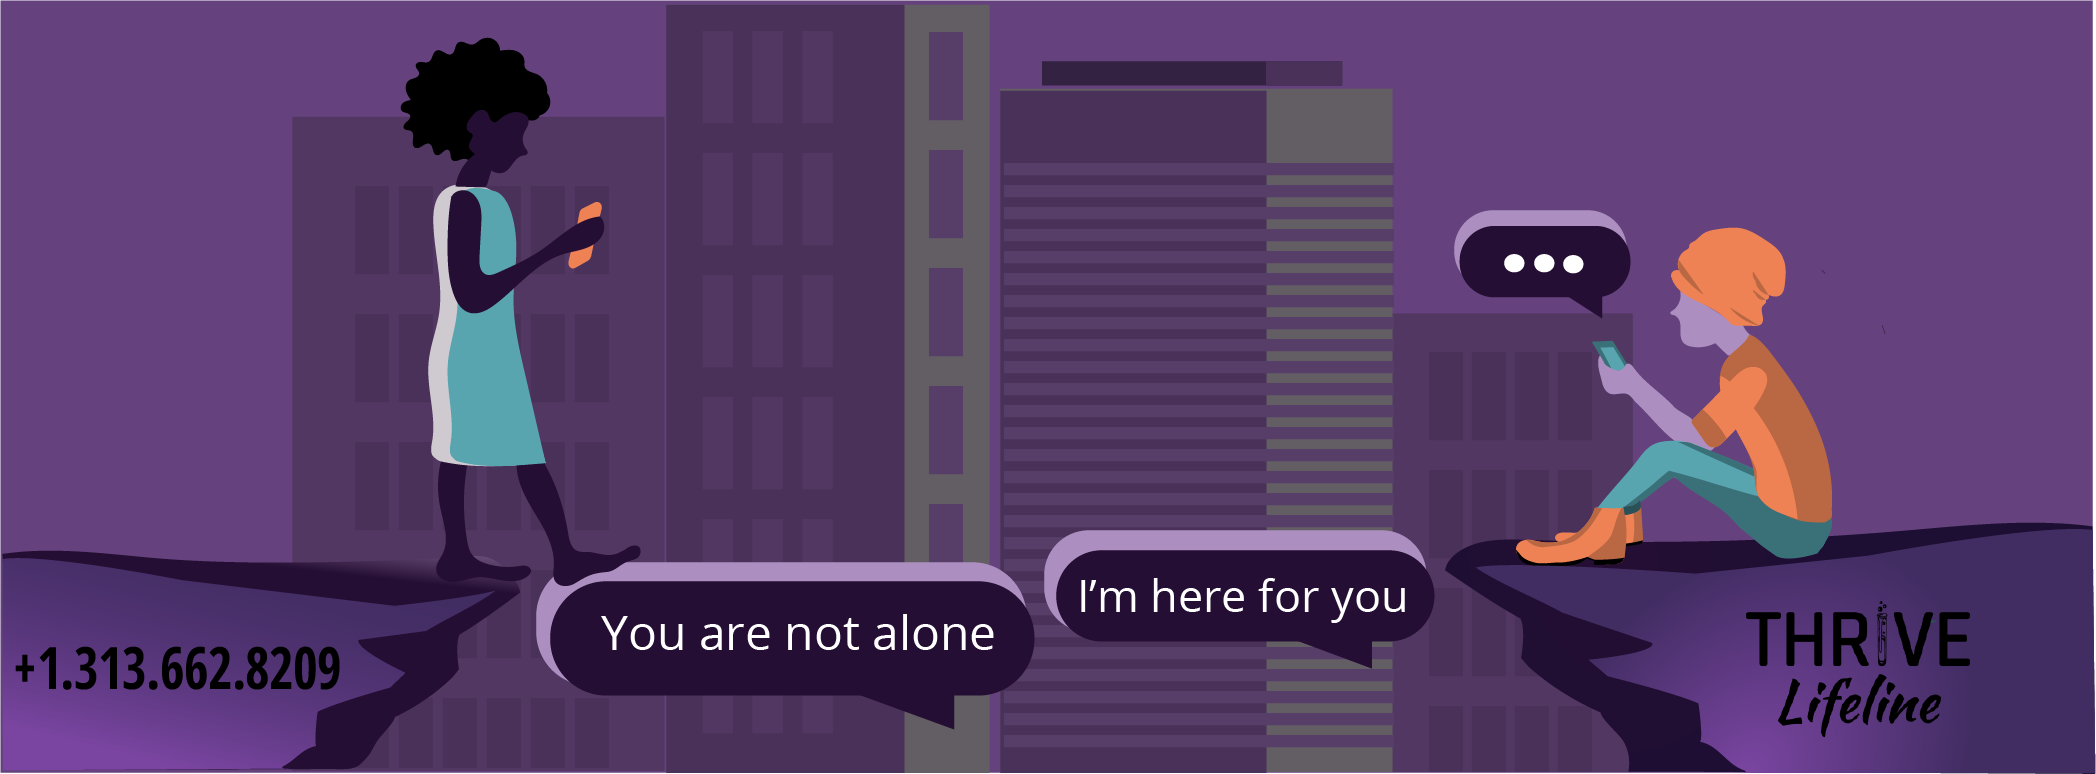 Two people are texting with buildings in the
background. The first person is walking on message bubbles toward another 
person. The first bubble says 'you are not alone.' 
The second bubble says 'I'm here for you.' 
The THRIVE Lifeline logo is in the corner with the phone 
number +1.313.662.8209.